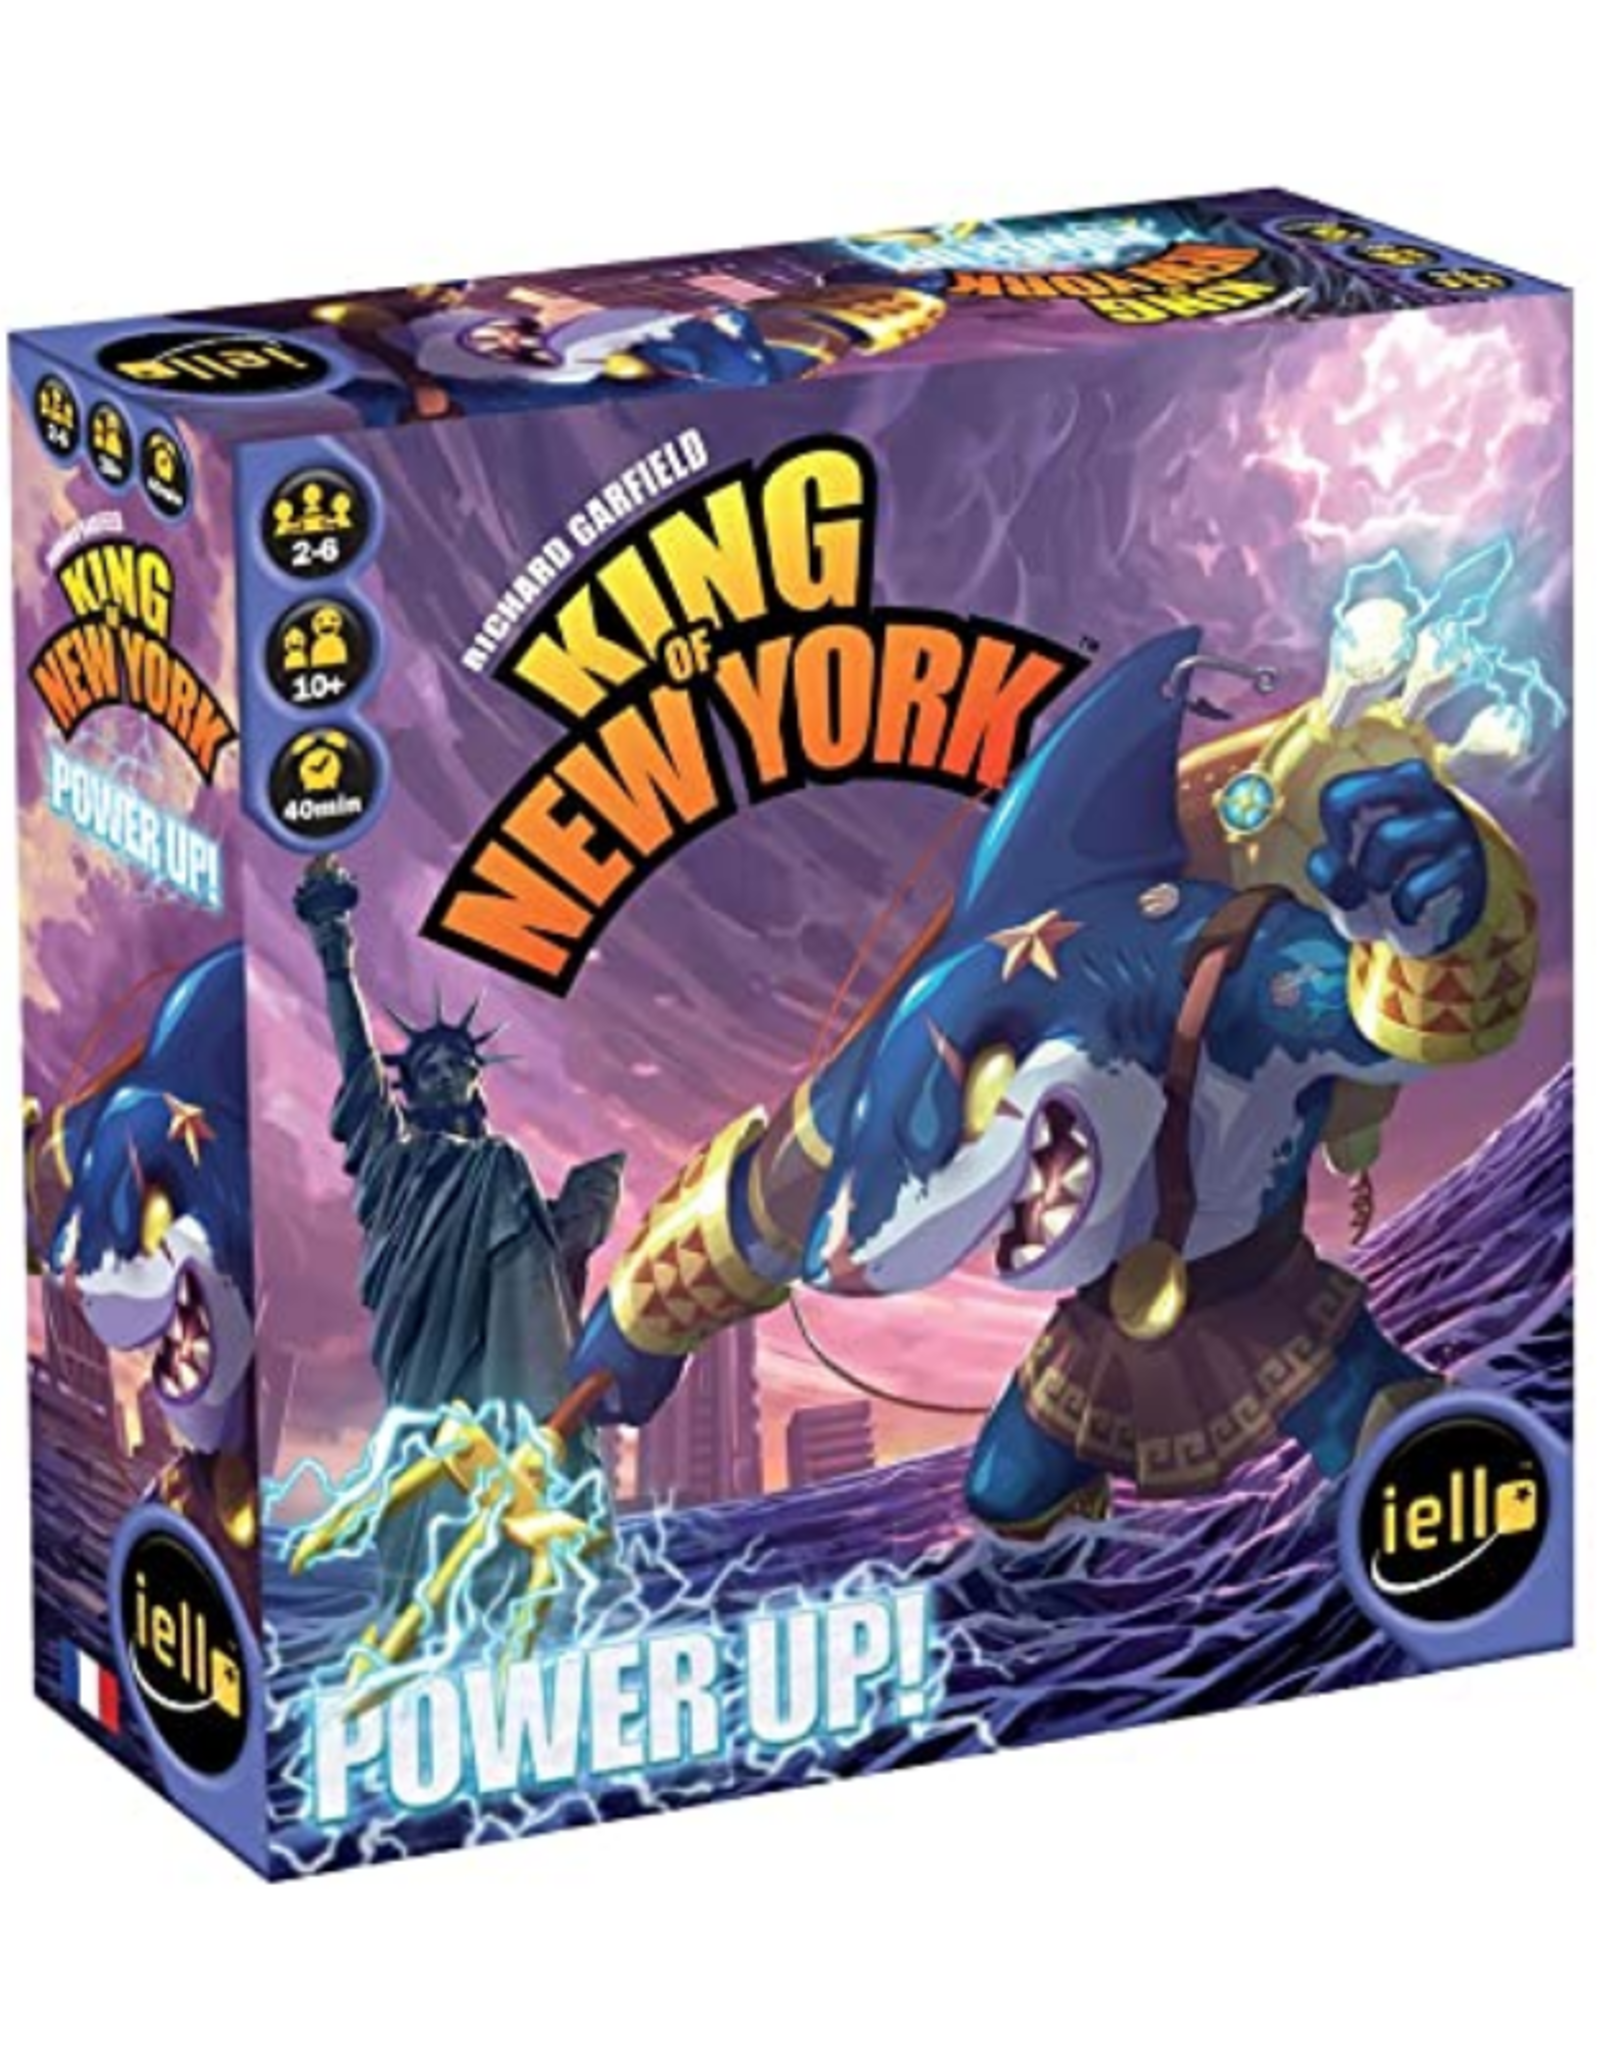 King of New York (Power up! Expansion)